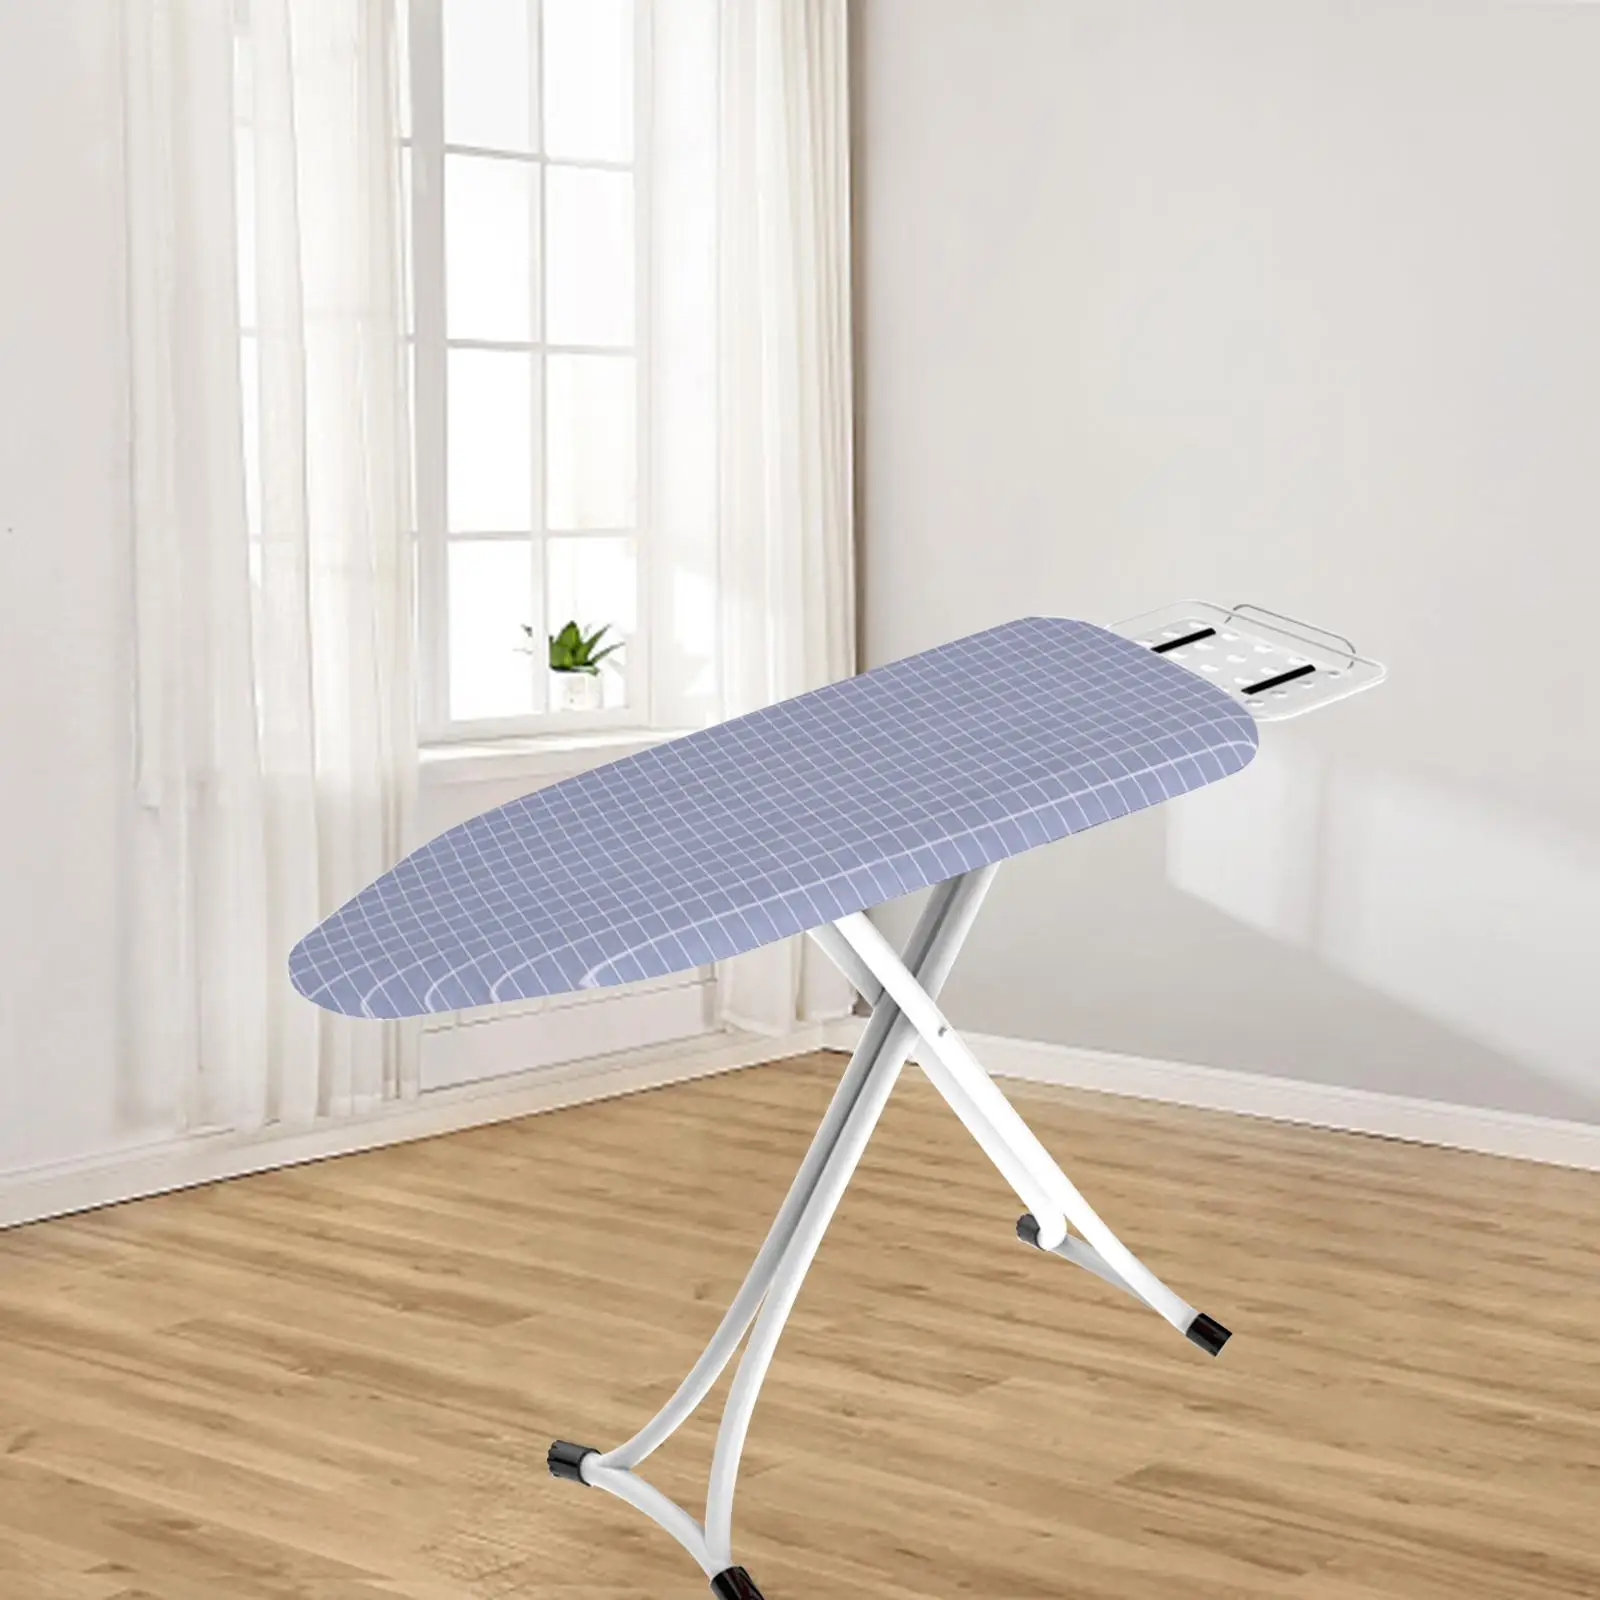 Ironing Board Padded Cover Heat Insulation Ironing Table Cover Protector Laundry Supplies